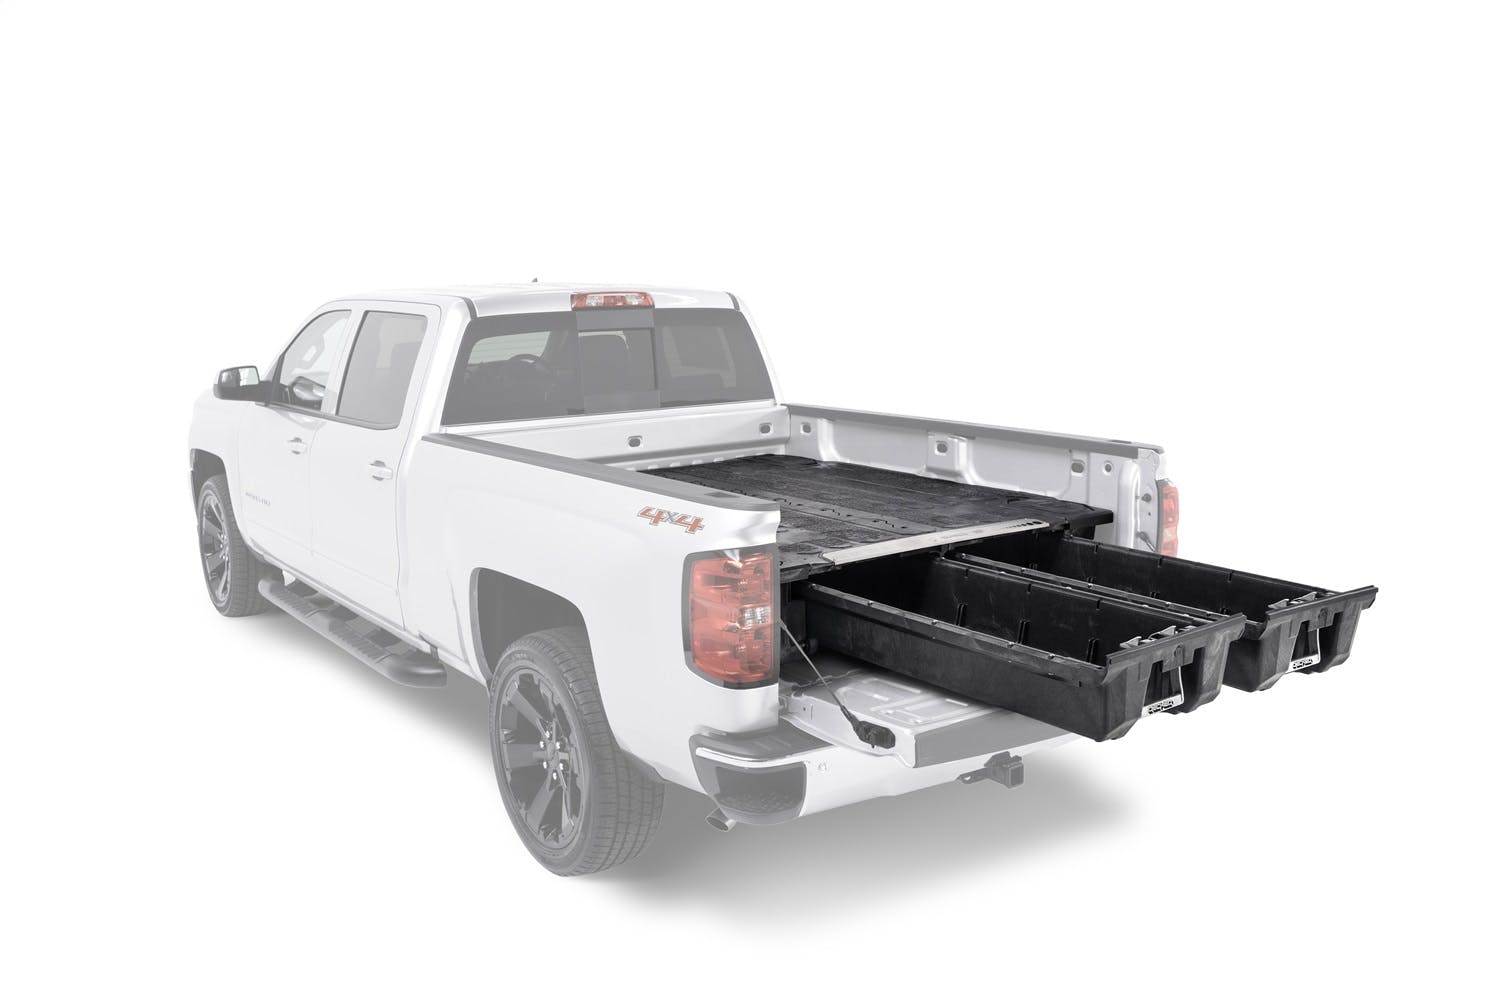 DECKED DN1 64.54 Two Drawer Storage System for A Full Size Pick Up Truck